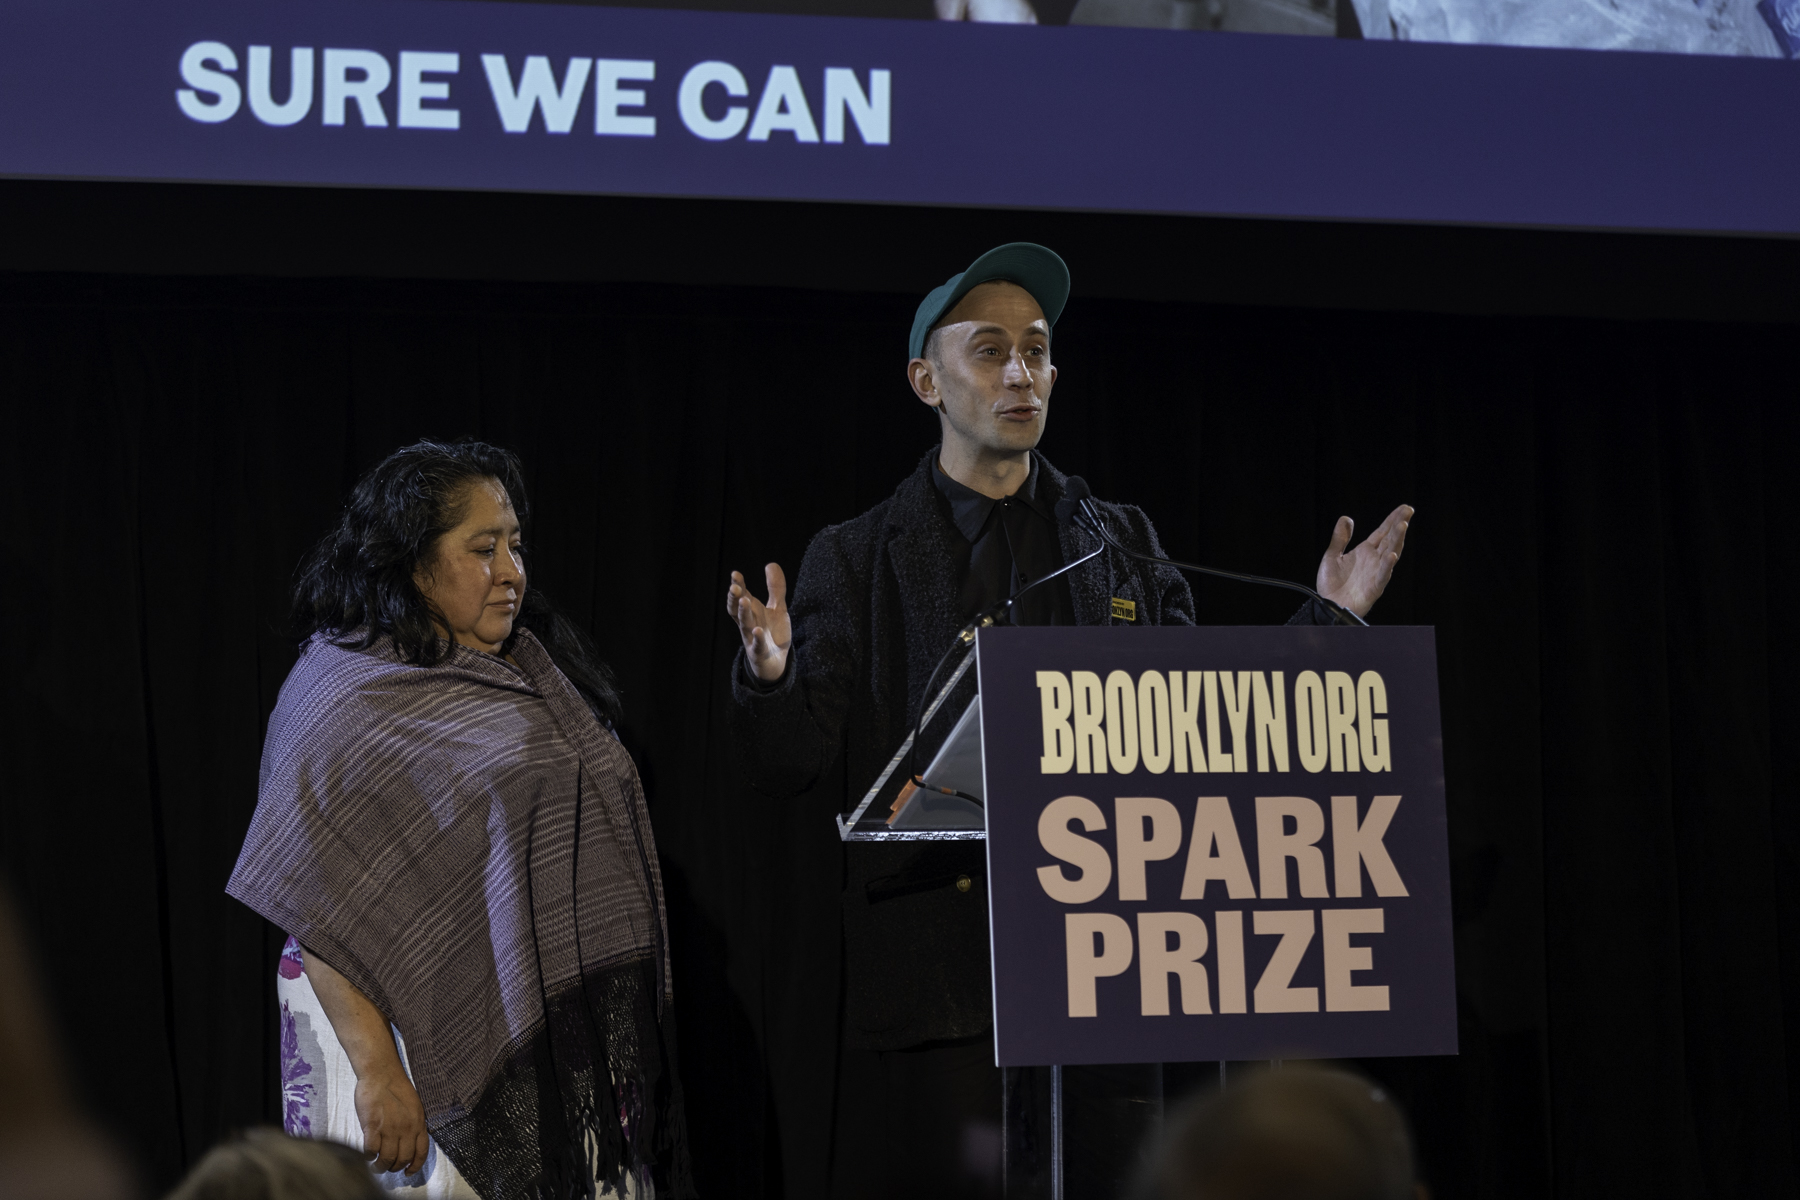 A speaker addresses an audience at a podium with the "brooklyn.org spark prize" sign, accompanied by a person wearing a shawl to their left.